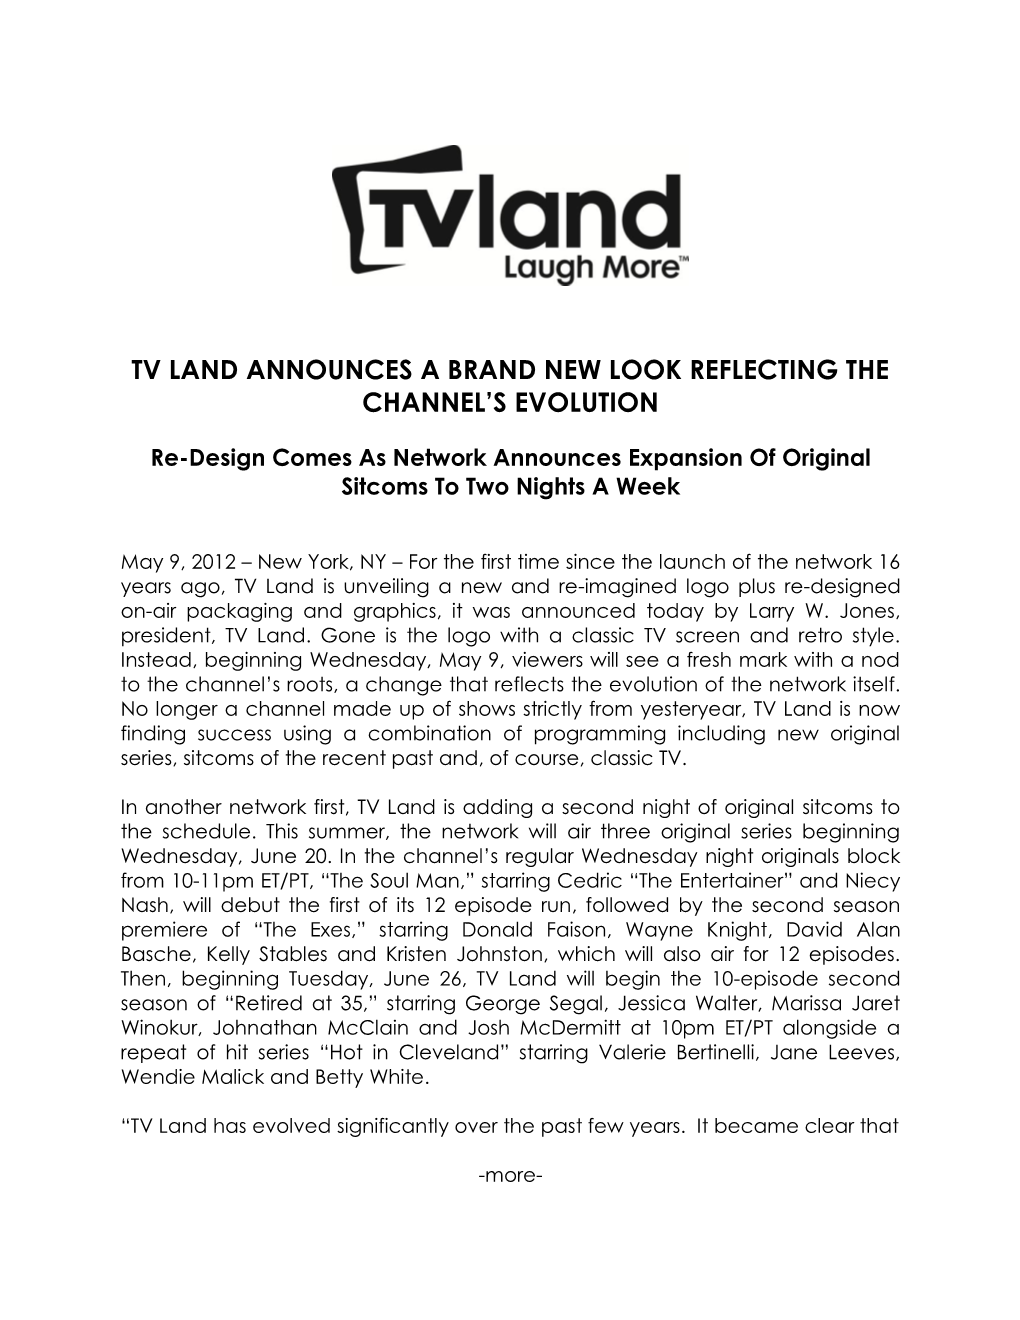 Tv Land Announces a Brand New Look Reflecting the Channel’S Evolution